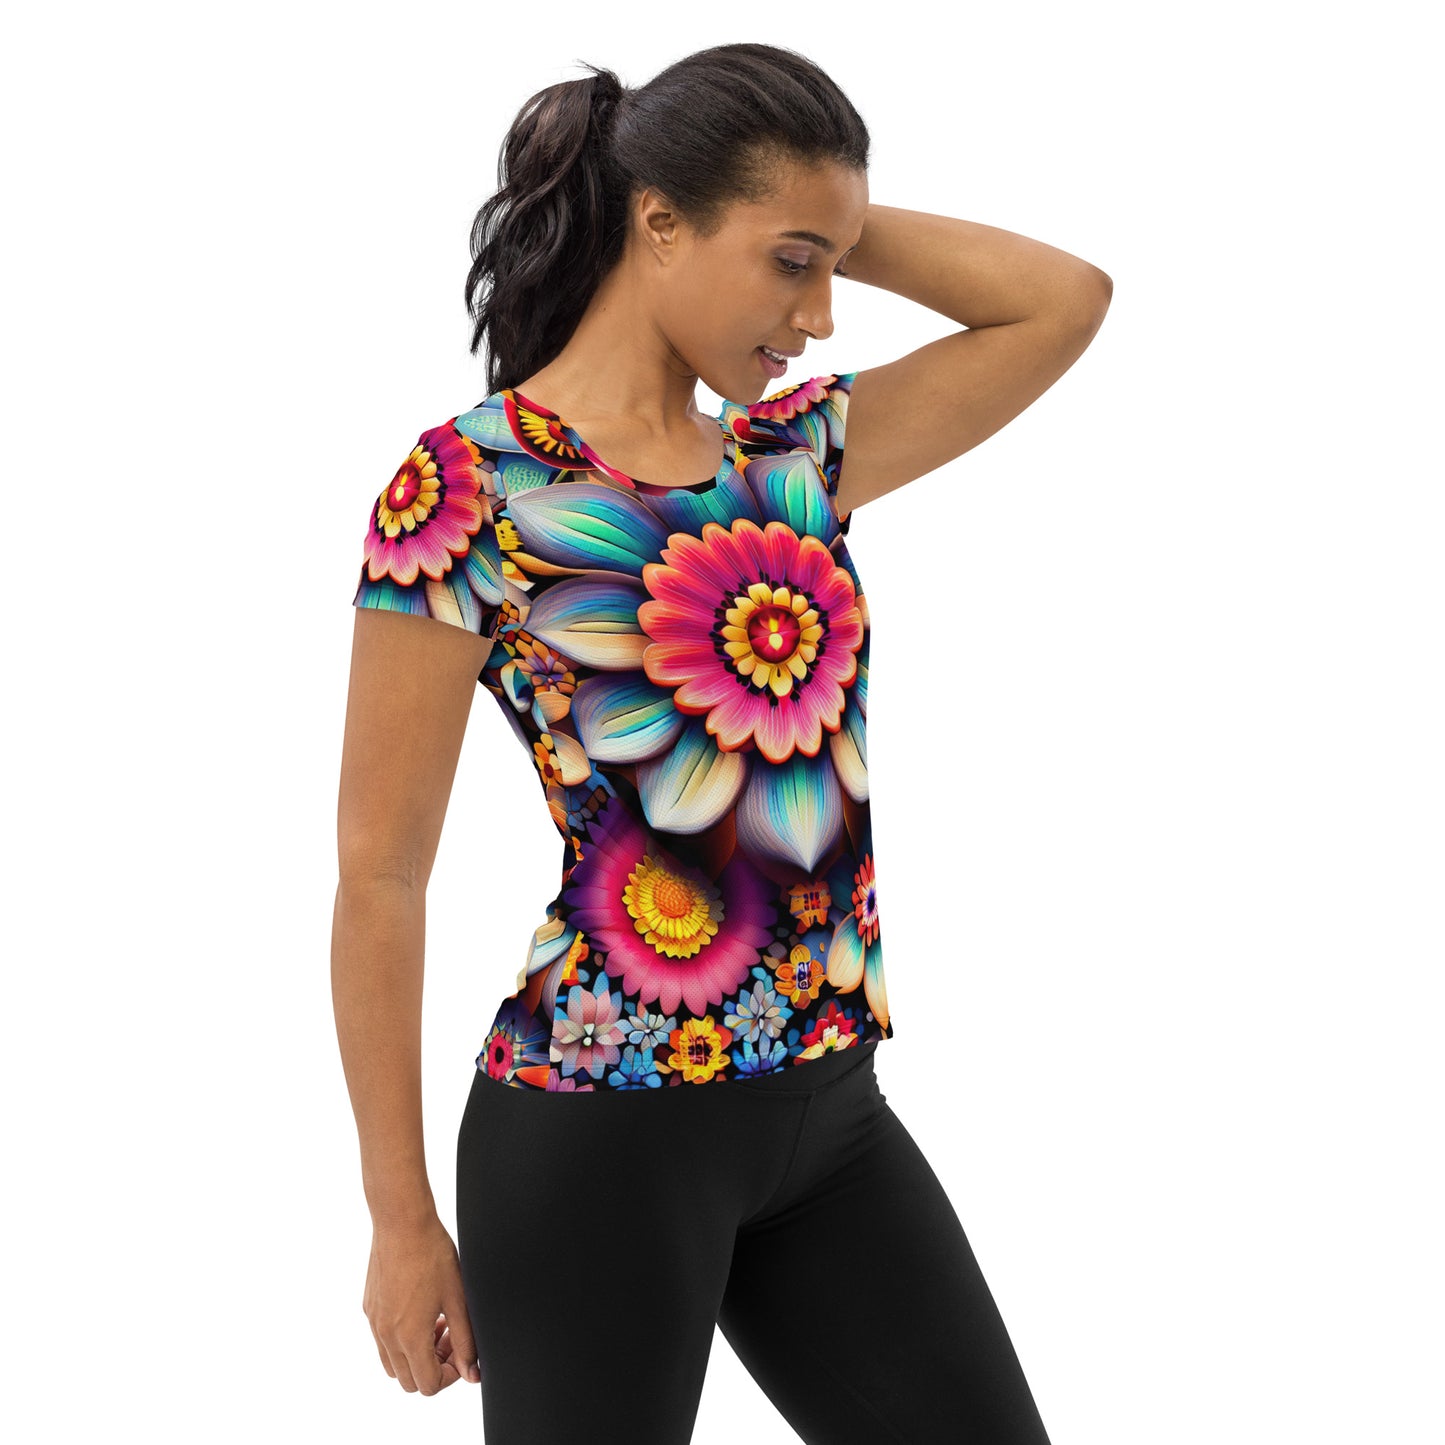 DMV 0219 Floral All-Over Print Women's Athletic T-shirt